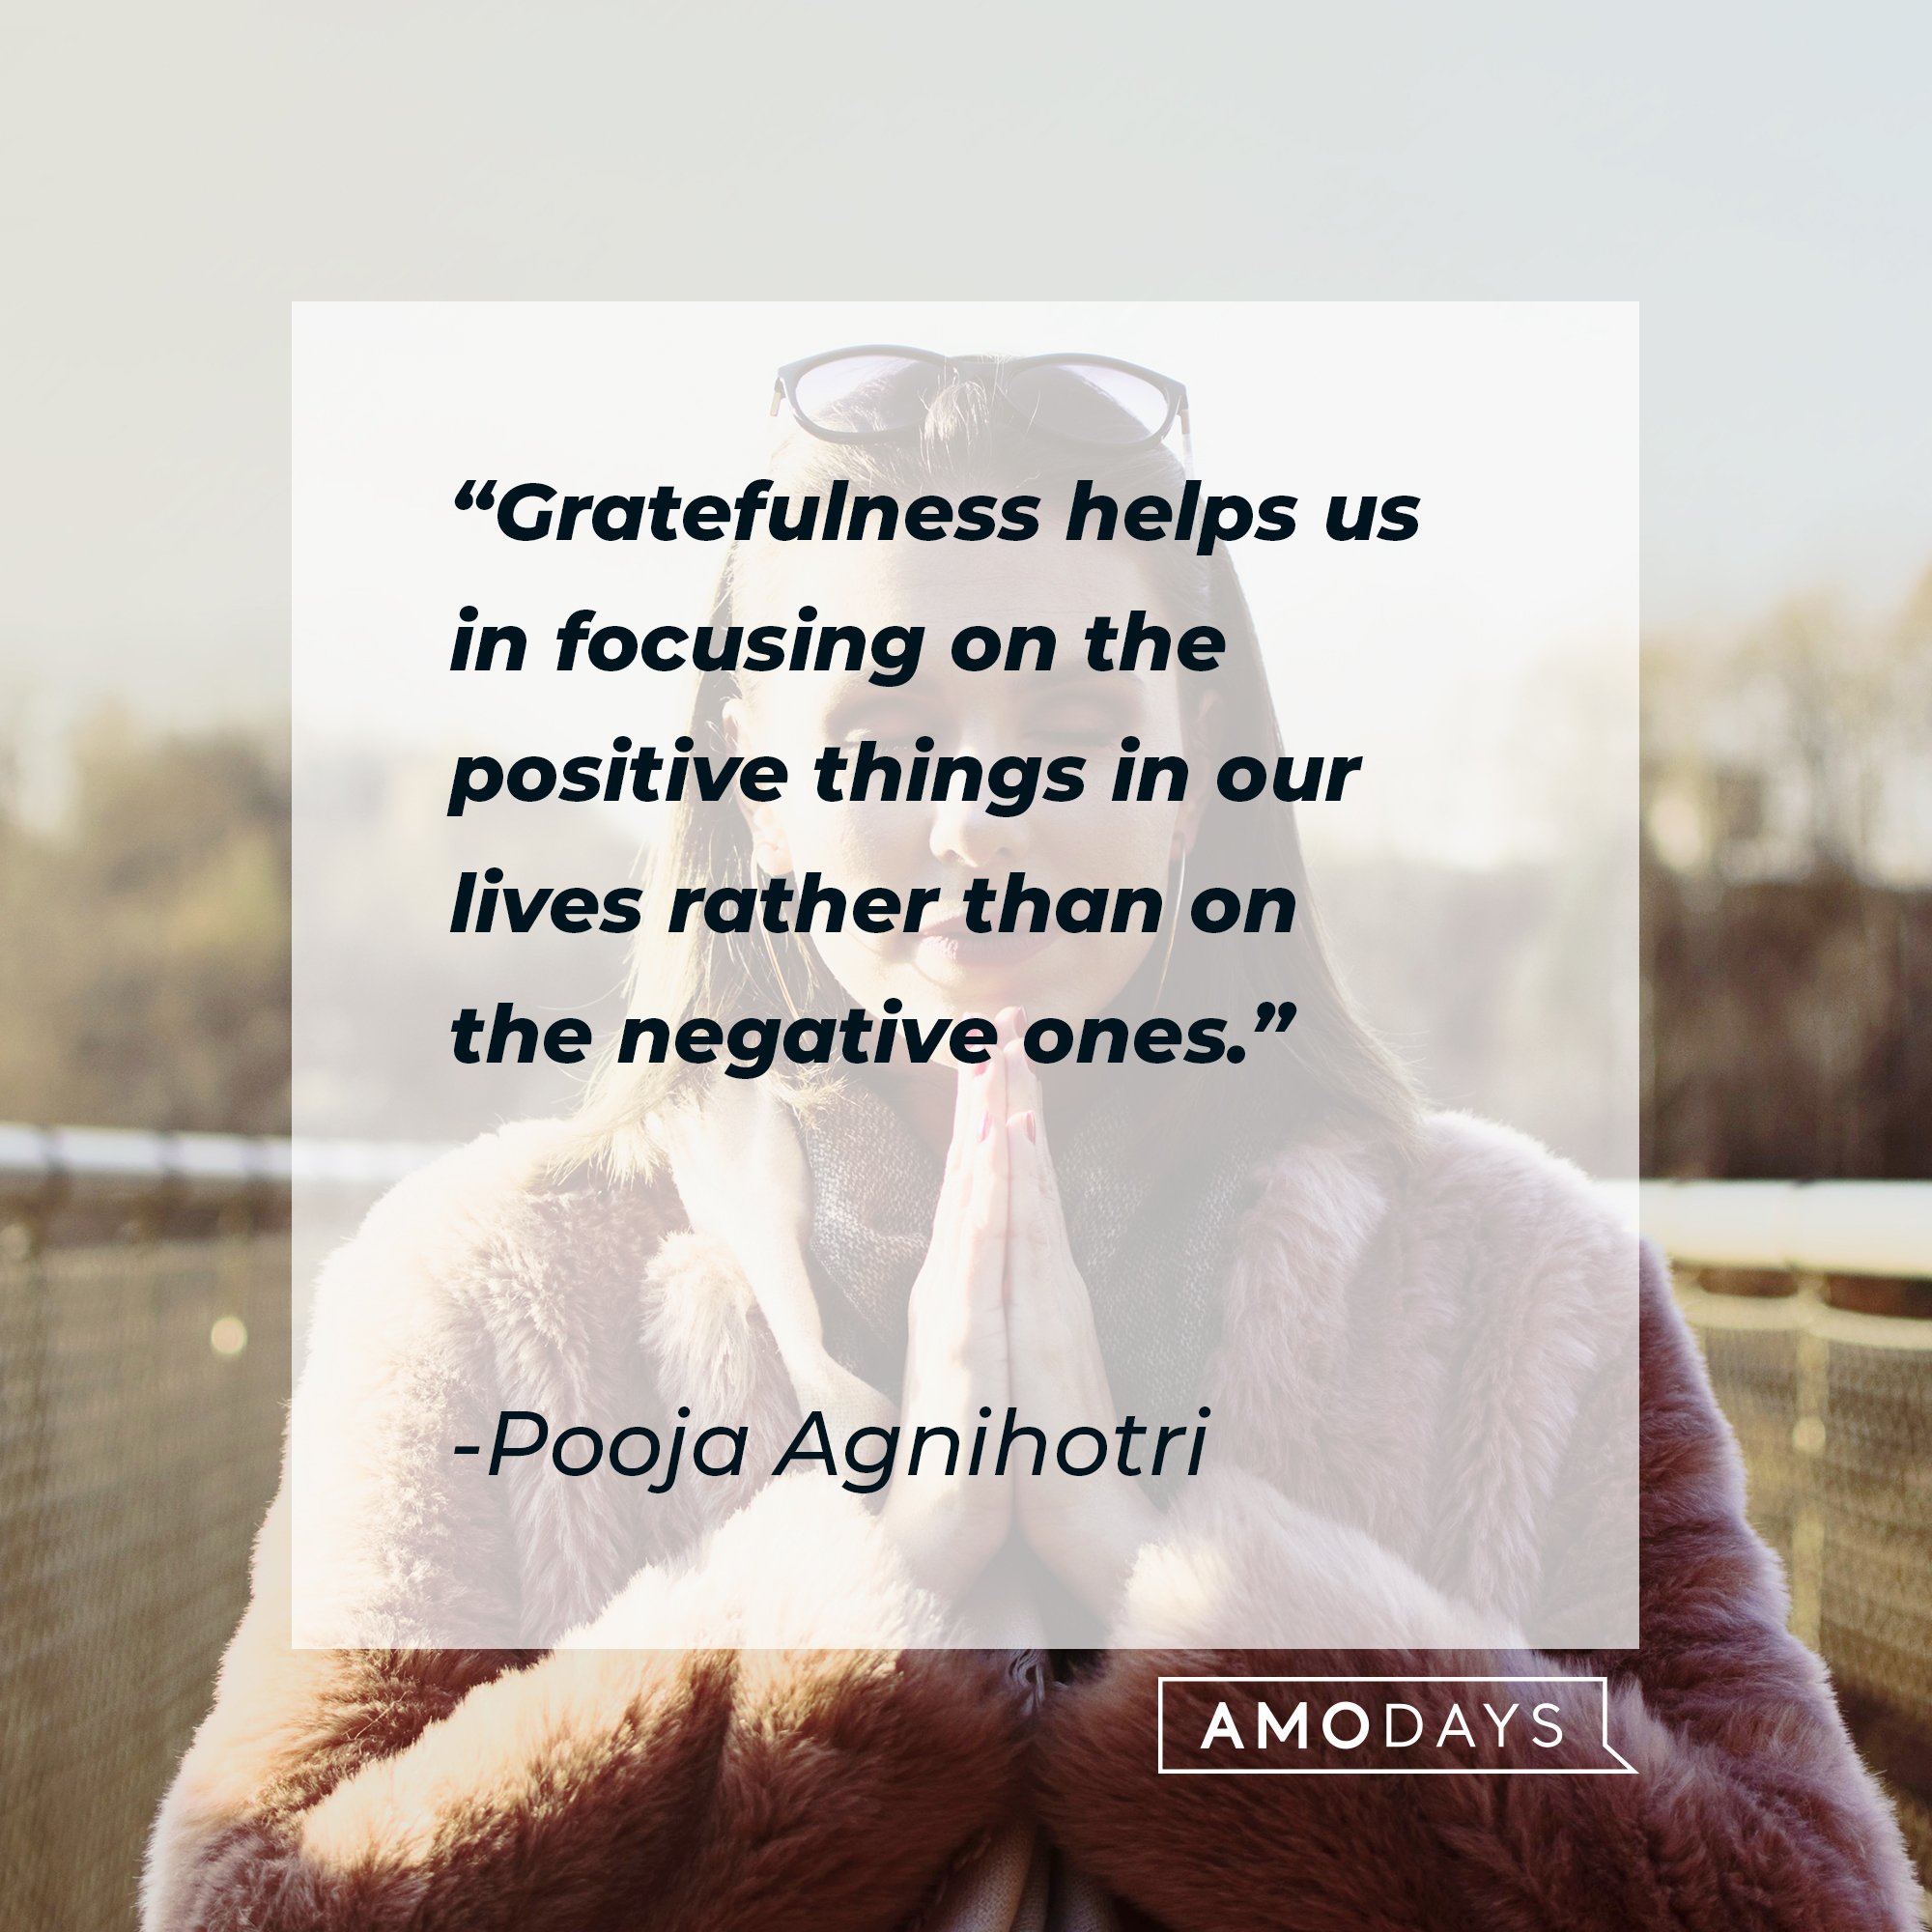 Pooja Agnihotri’s quote: "Gratefulness helps us in focusing on the positive things in our lives rather than on the negative ones." | Image: AmoDays